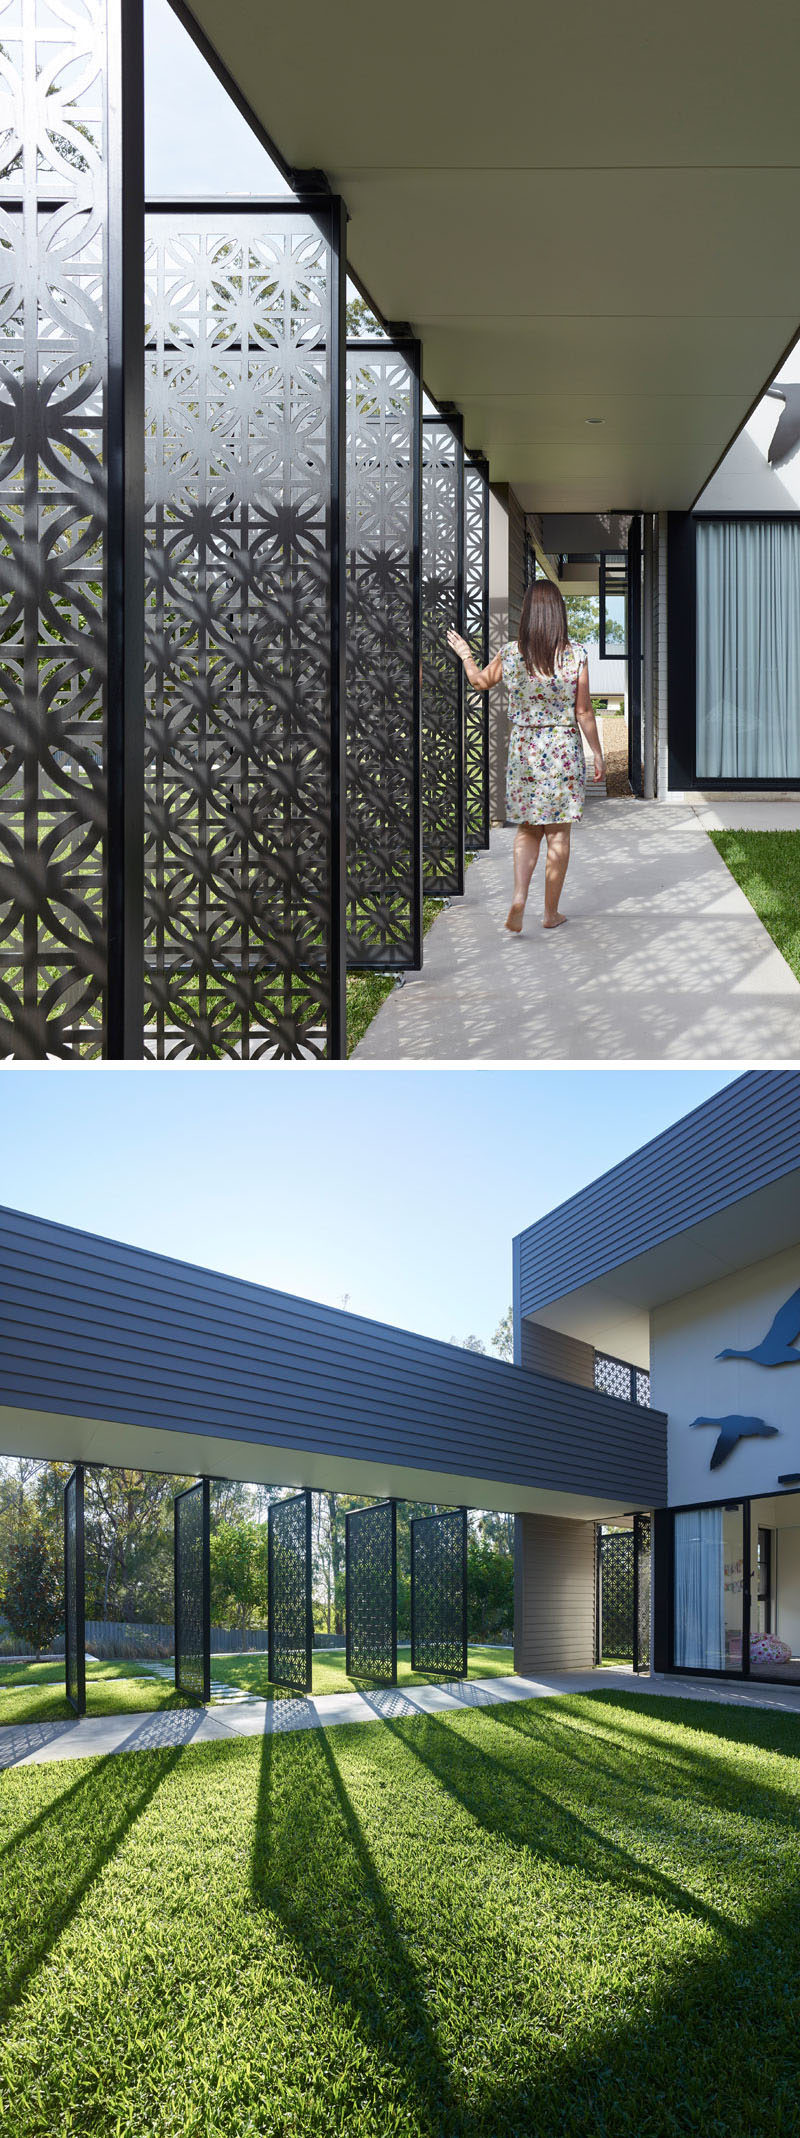 The laser-cut screens featured on this modern house, have a repetitive pattern and provide a unique experience for someone who is entering the courtyard, the heart of the home.